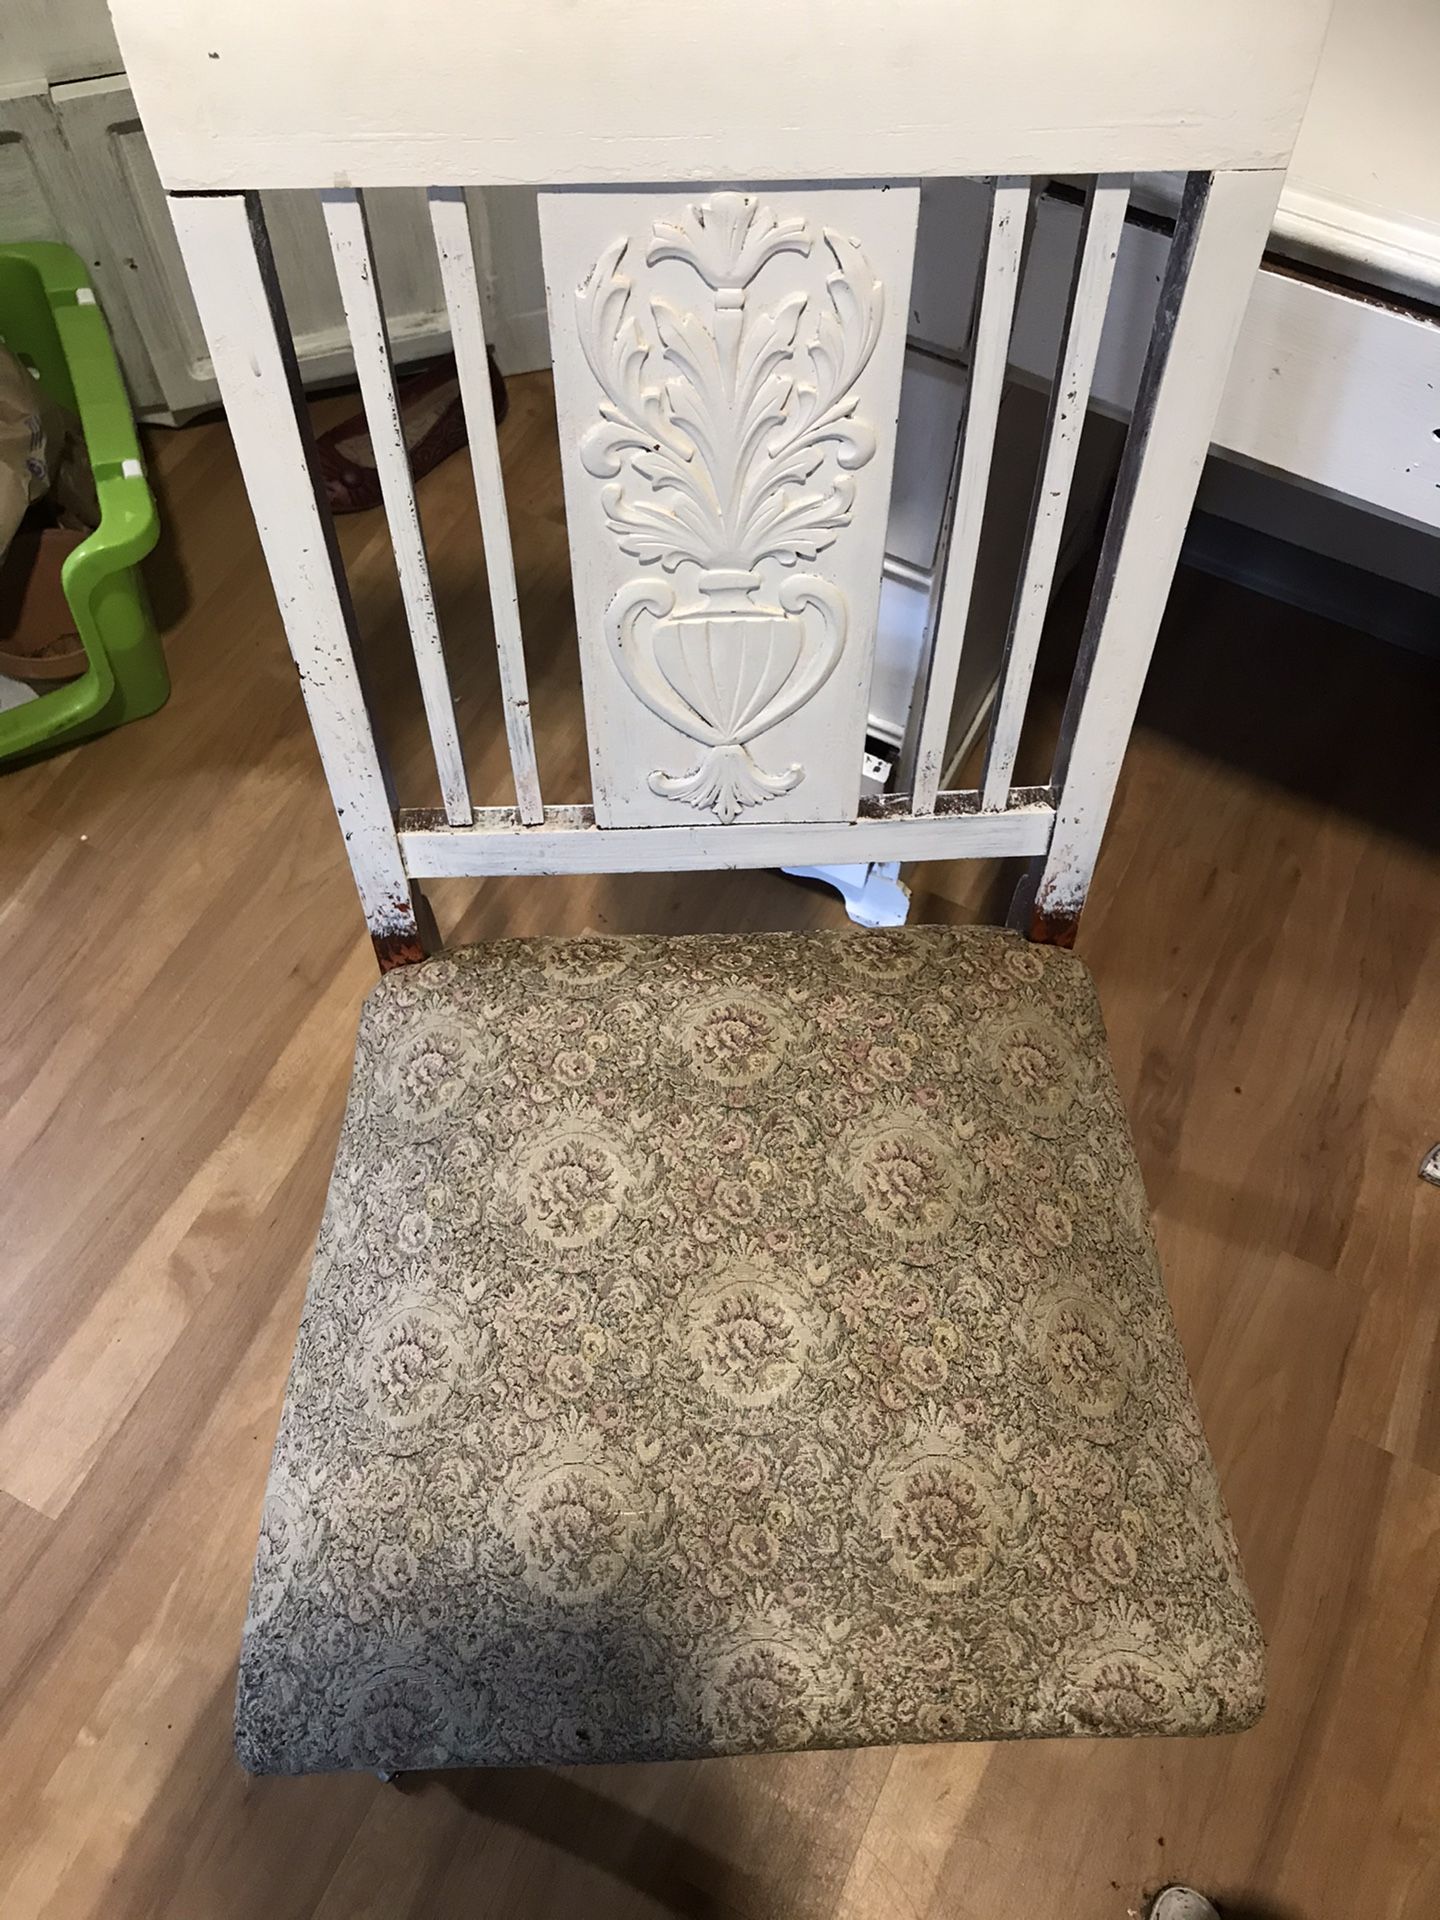 Half painted antique solid wood chair $25 OBO - YOU HAUL ONLY